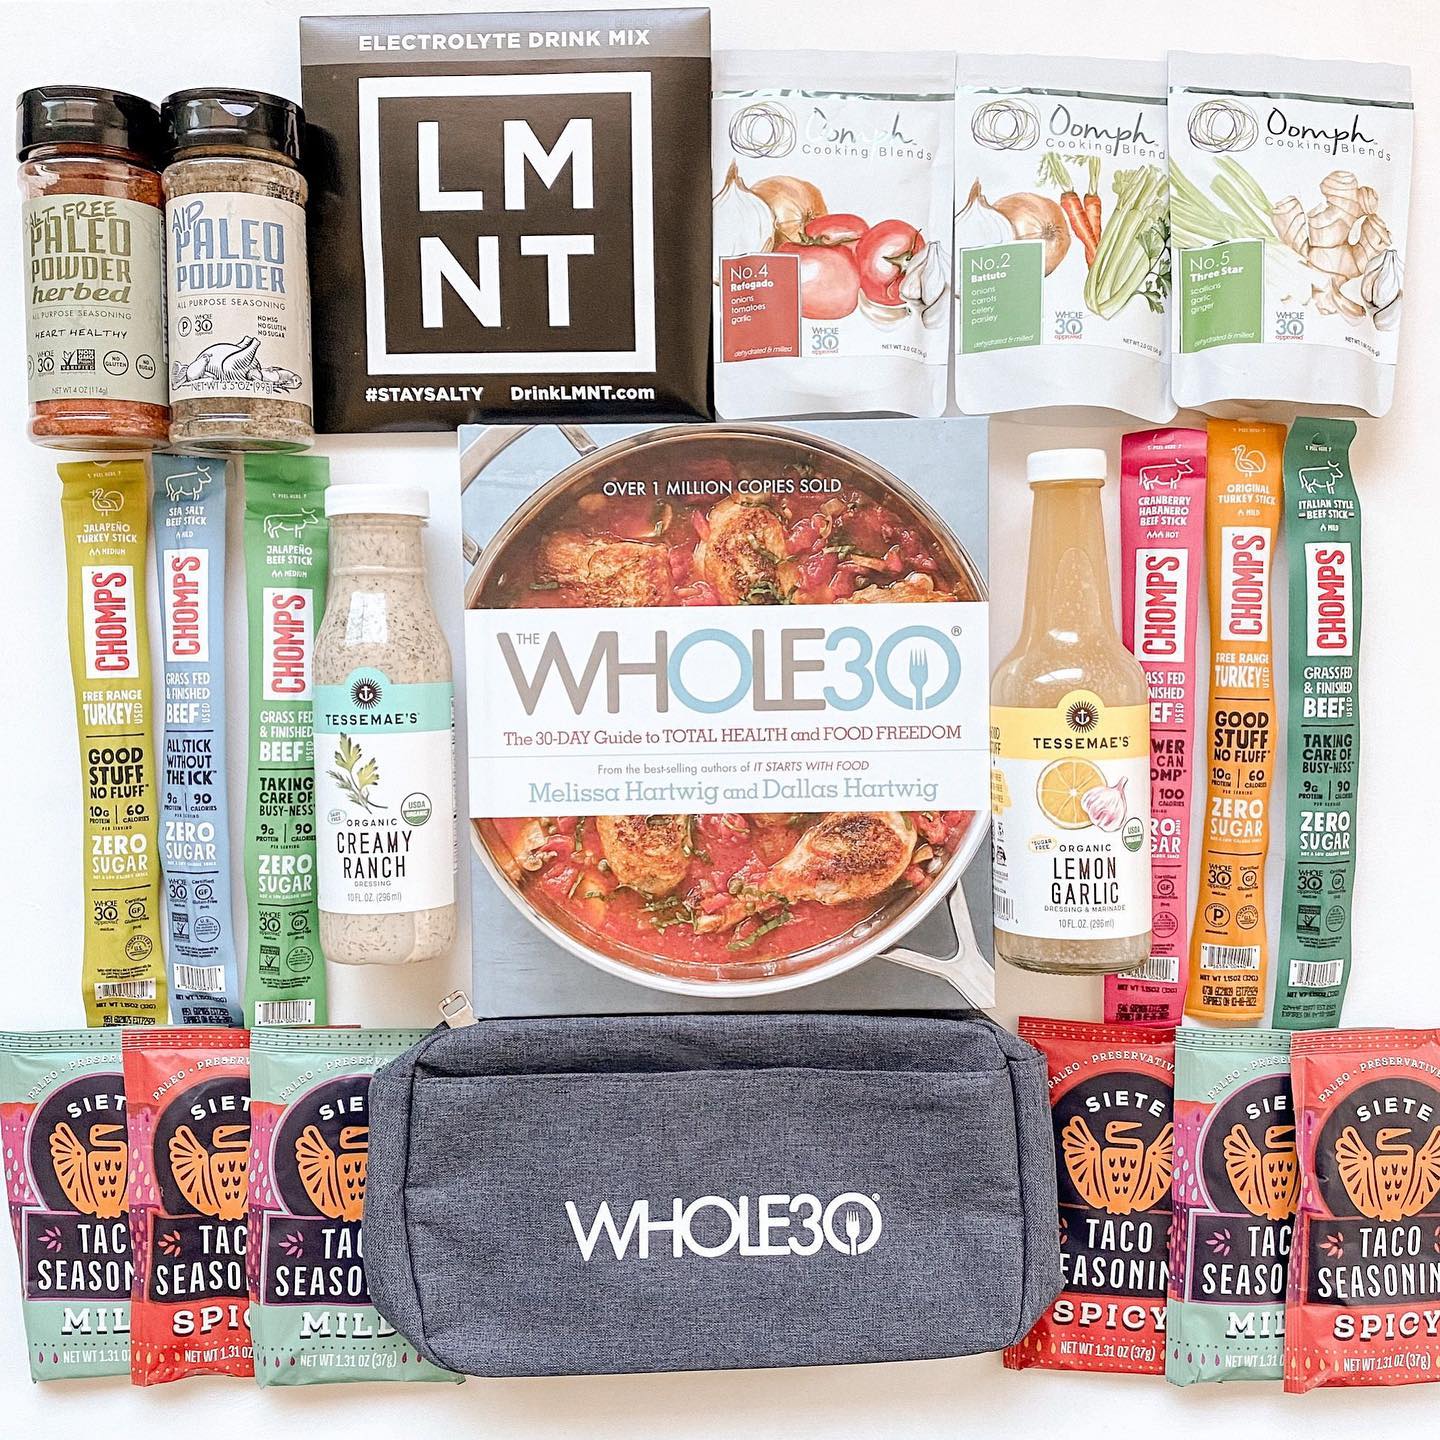 🎉SEPTEMBER WHOLE30 GIVEAWAY🎉

The doors to my September Whole30 Group Coaching program are officially open, and to kick things off I'm giving away the ULTIMATE Whole30 starter kit! 

The products included in this prize package are top-notch and ones that I always have stocked in my pantry. Thank you so much to these brands for not only participating in this giveaway, for also for making amazing food products with SIMPLE ingredients. No additives, no sugar, no preservatives. Just real, whole foods in a convenient package. 

And finally, if you've never heard of the Whole30 - listen up.👂 This is a 30-day self-experiment that literally has the ability to change 👏 your 👏 life 👏 It's 30-days of real food,  30-days of community, 30-days of self-love and 30-days of realizing that you can quite literally change your life, by changing what you put on your plate. 🍽️

"It's a monumental transformation in how you think about food, your body, your life, and what you want out of the time you have left on this earth. It's so much bigger than just food. It's a paradigm shift the likes of which you may only experience few times in your whole life." 
- 𝘞𝘩𝘰𝘭𝘦30 𝘉𝘰𝘰𝘬

You have what it takes to do this. You've done harder things in your life than this. Even if you're scared, do it scared. I have your back every step of the way. 🙌

🎉🎉🎉

Here's how to enter the giveaway:
👇👇👇

1️⃣ Follow me, @amandamillernutrition and the amazing brands above including, @chomps @tessemaes @paleopowder @oomphcooking @sietefoods and @drinklmnt

2️⃣ Tag a friend who LOVES good food (separate comment for each tag)

3️⃣ Save yourself a seat in my upcoming FREE Workshop called, Healthy Eating Has Nothing to do With Willpower. (Link in Bio) 

GOOD LUCK!!

*Contest only open to Canada & US. 

#septemberwhole30 #whole30giveaway #paleopowder #drinklmnt #sietefoods #realfood #tessemaes #oomphcooking #chomps #whole30approved #letsgetstarted #whole30support #whole30certifedcoach #amandamillernutrition #holisticnutritionist